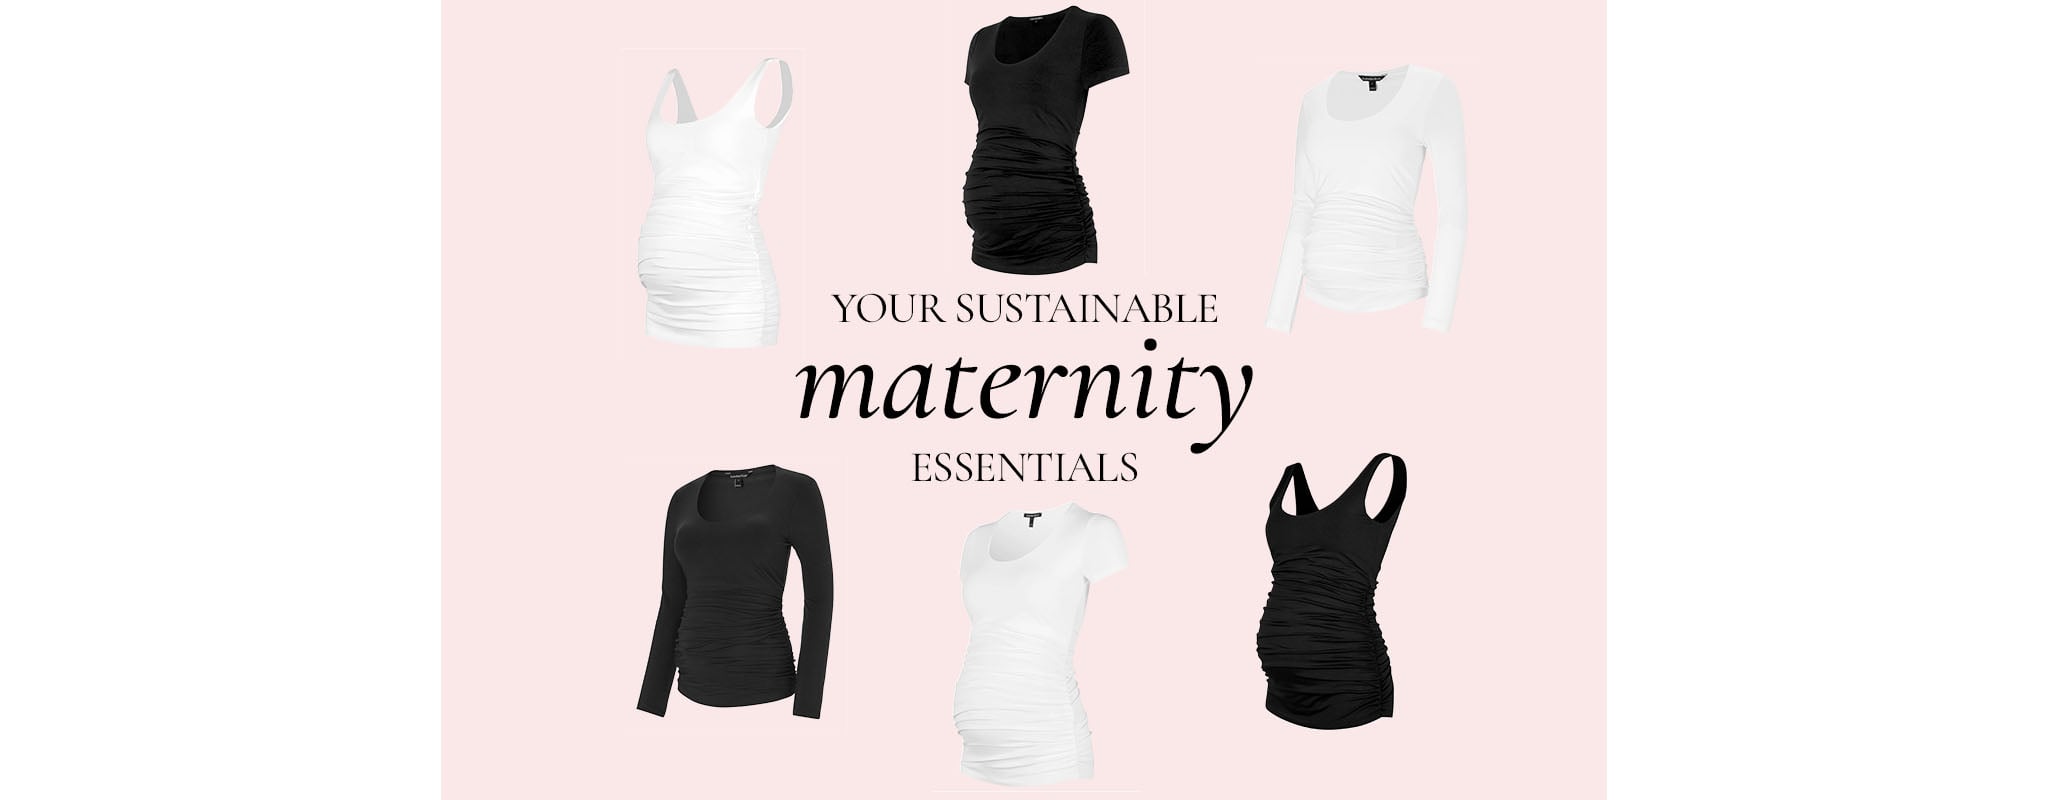 Your sustainable maternity essentials